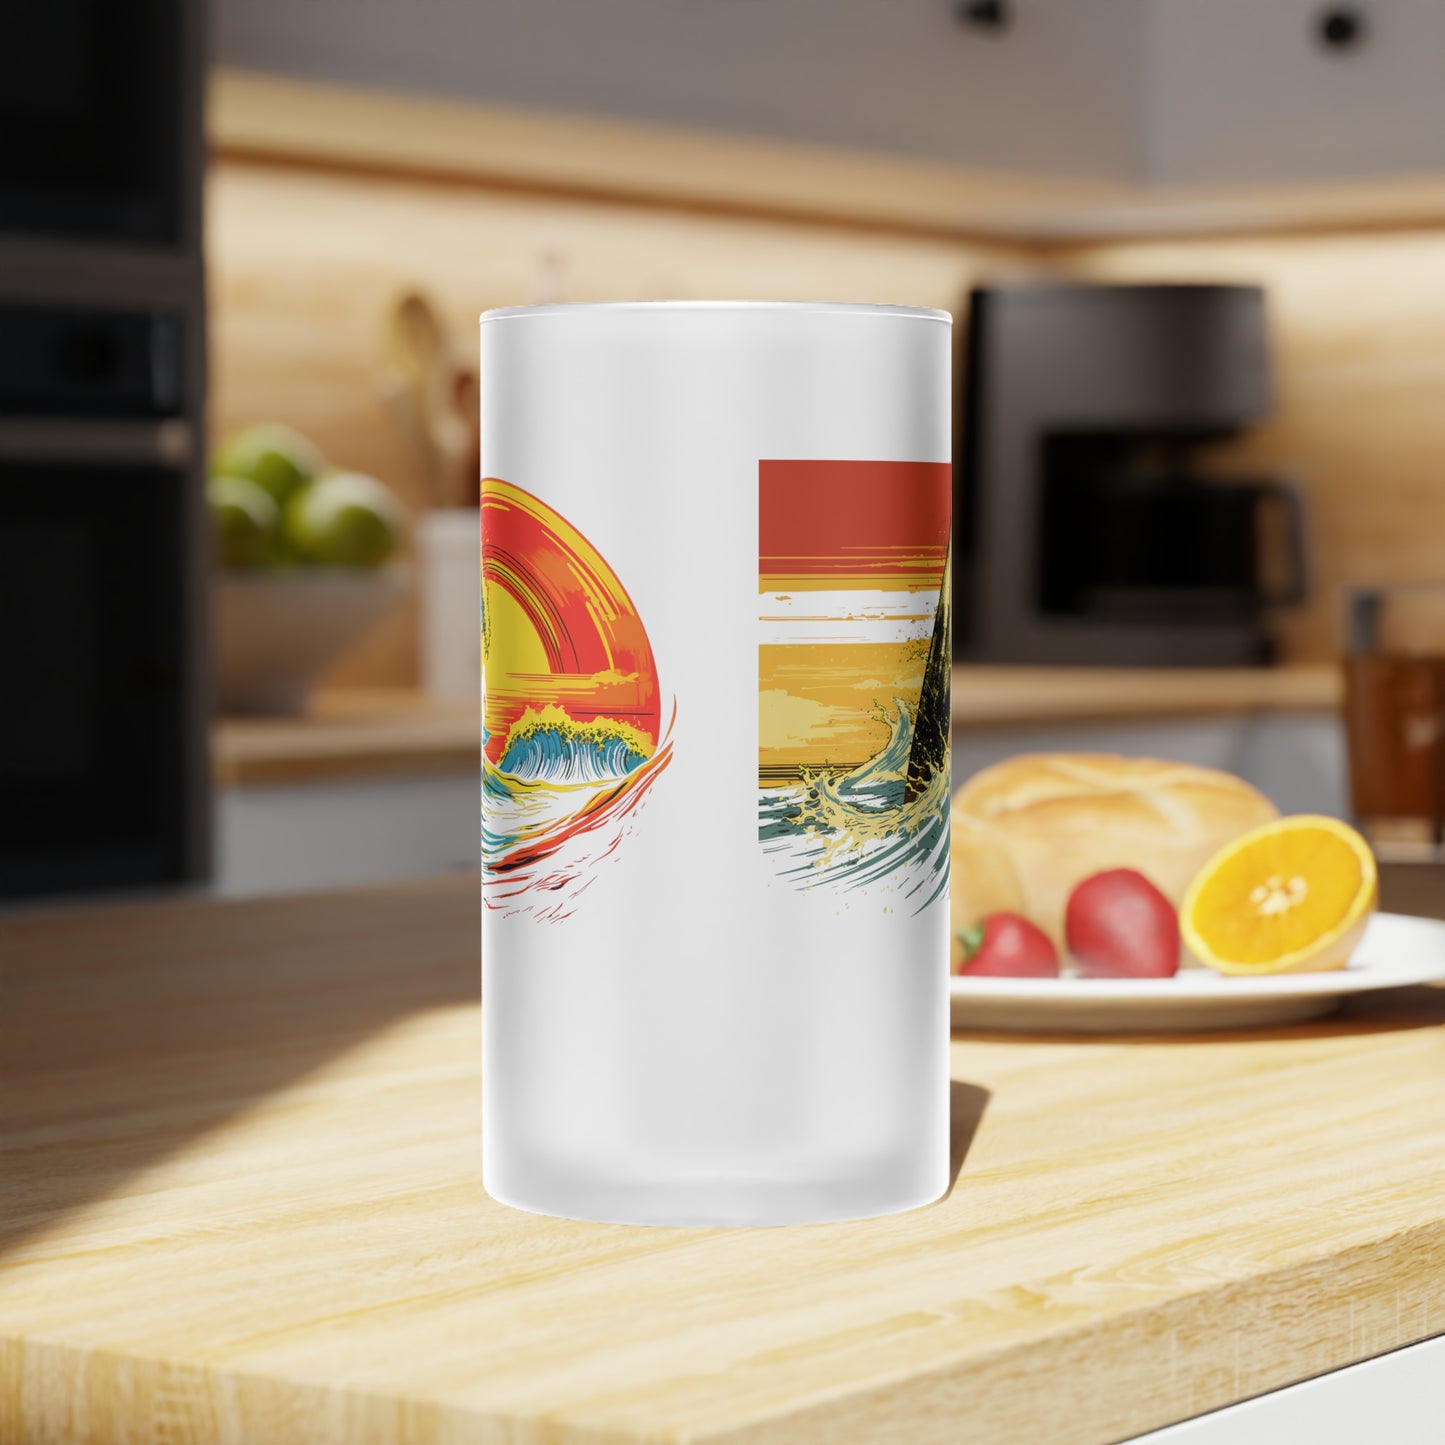 Frosted Glass Beer Mug - Classic Surreal Surfing, 2 Designs on 1 - Waves 066